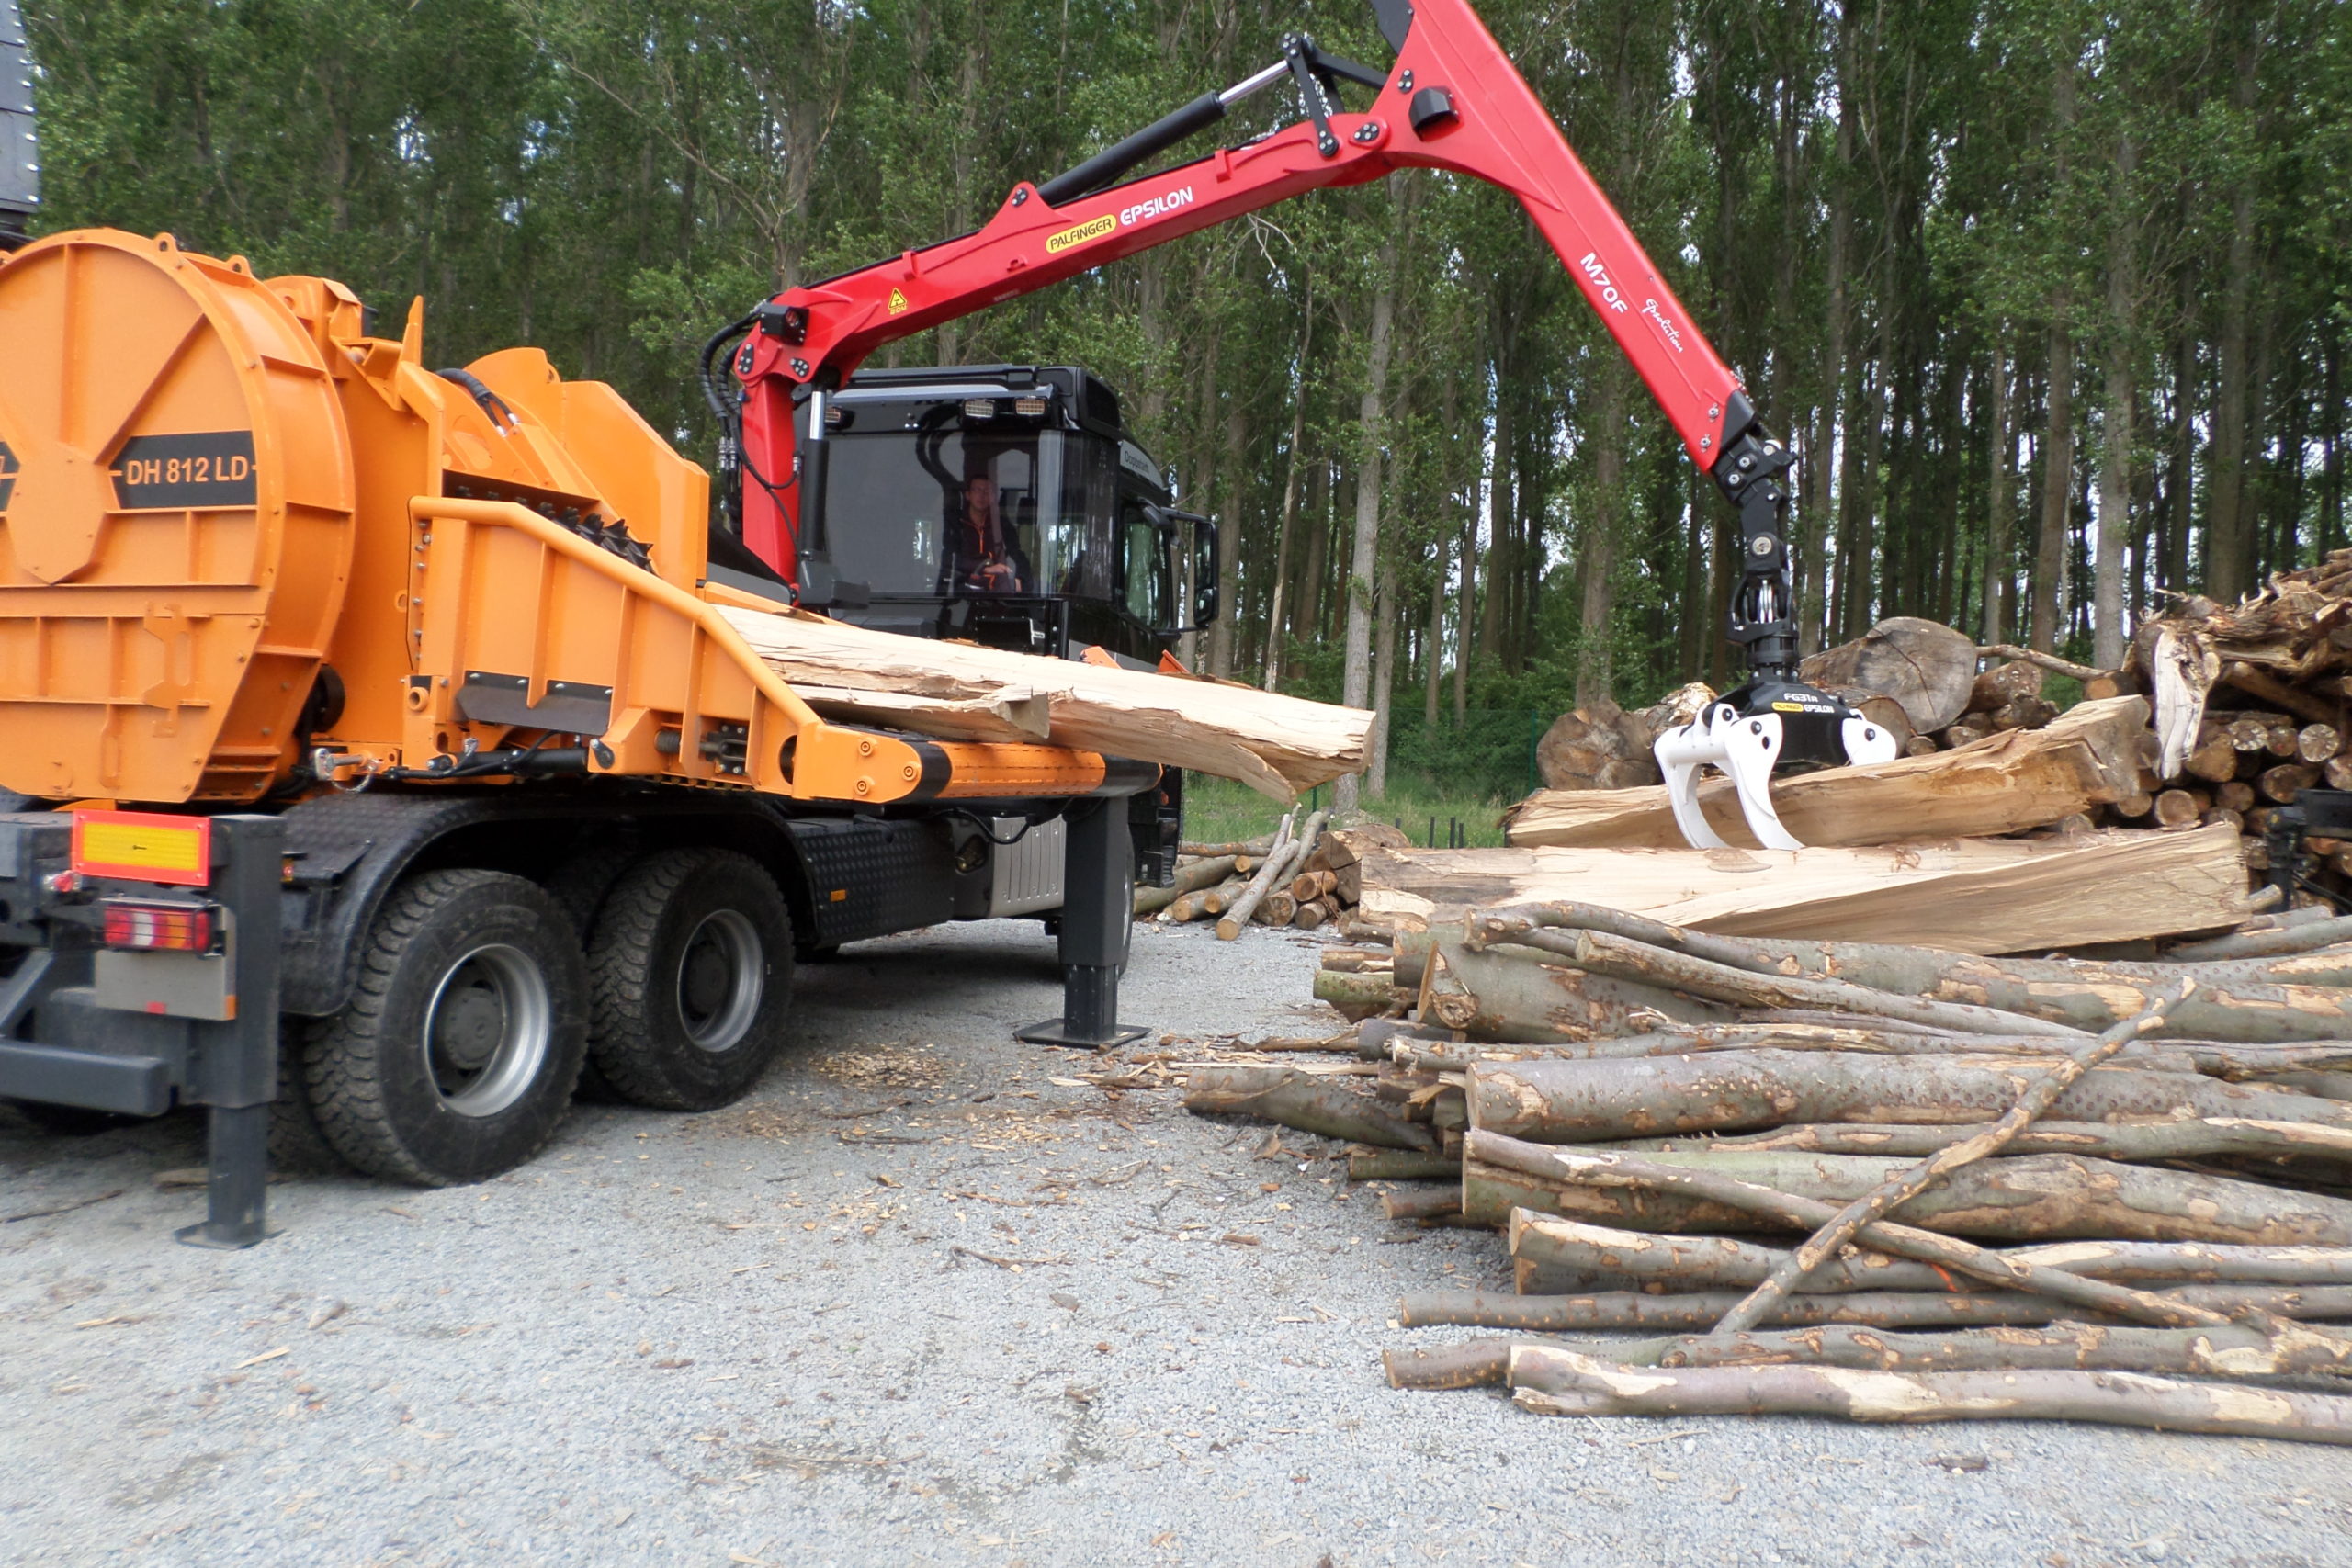 Doppstadt displayed new advances in its chipper range